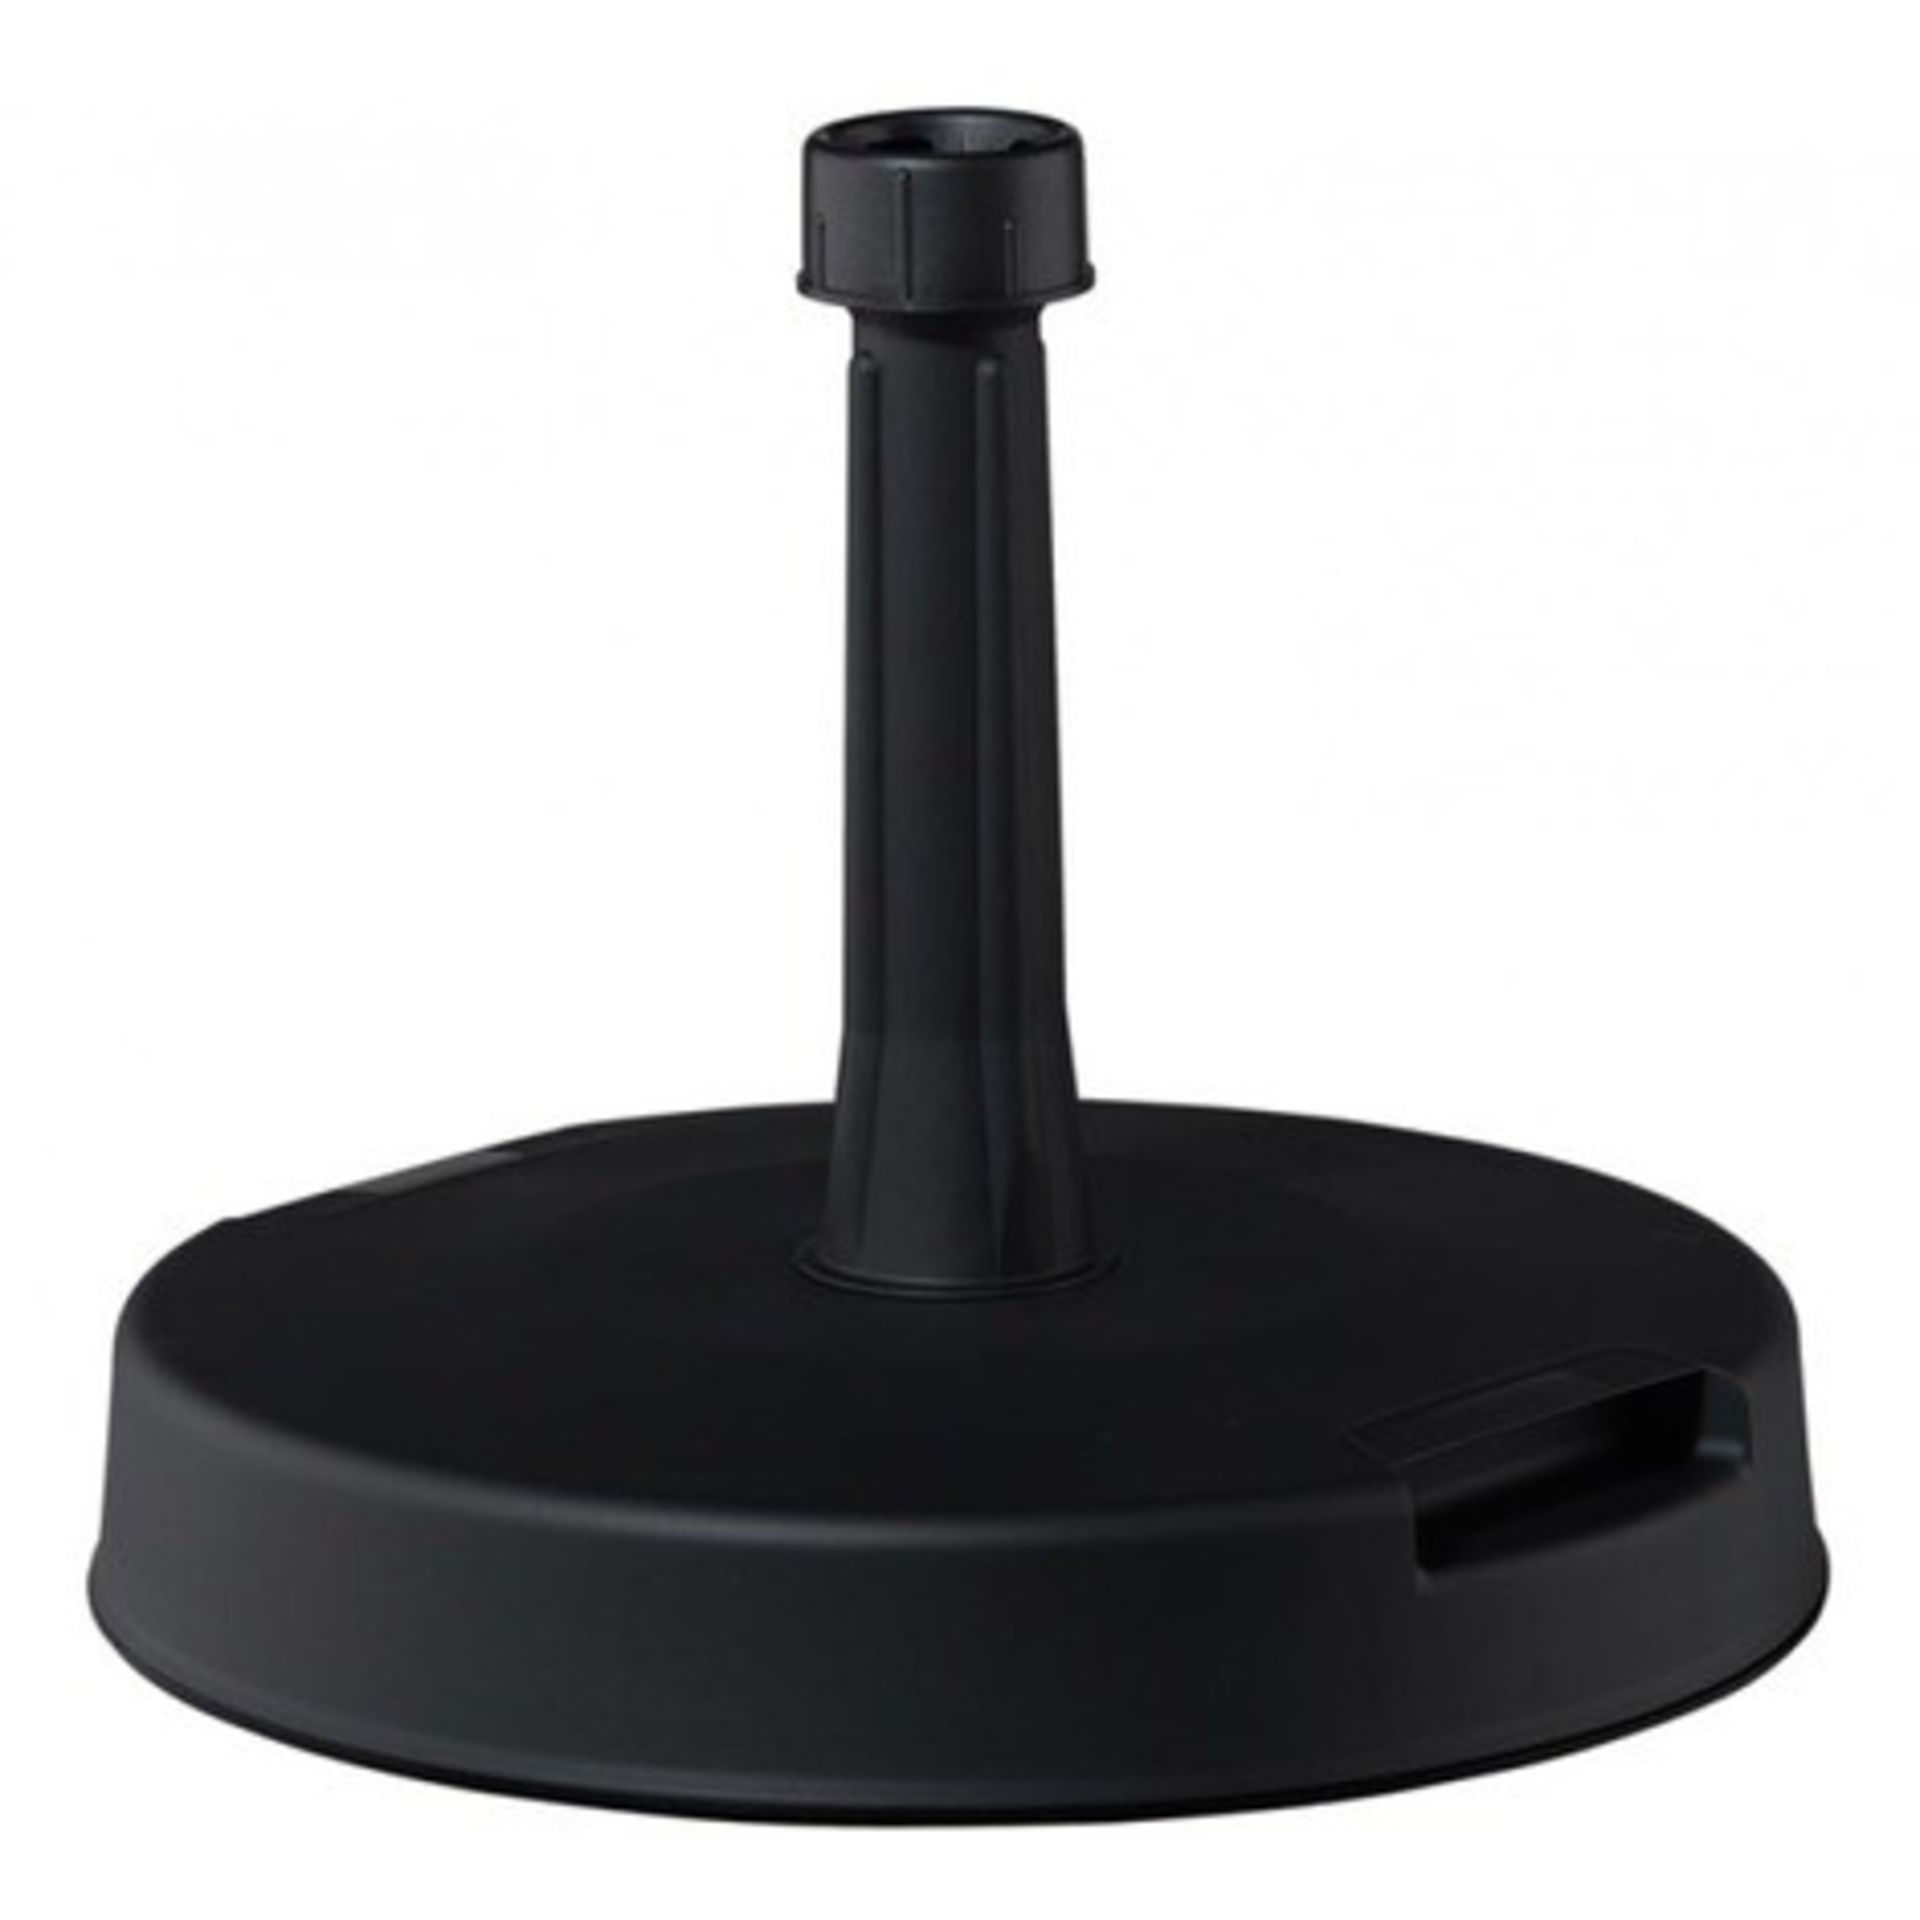 1 GRADE A BOXED PLASTIC AND CONCRETE PARASOL BASE IN BLACK / RRP £25.00 (PUBLIC VIEWING AVAILABLE)